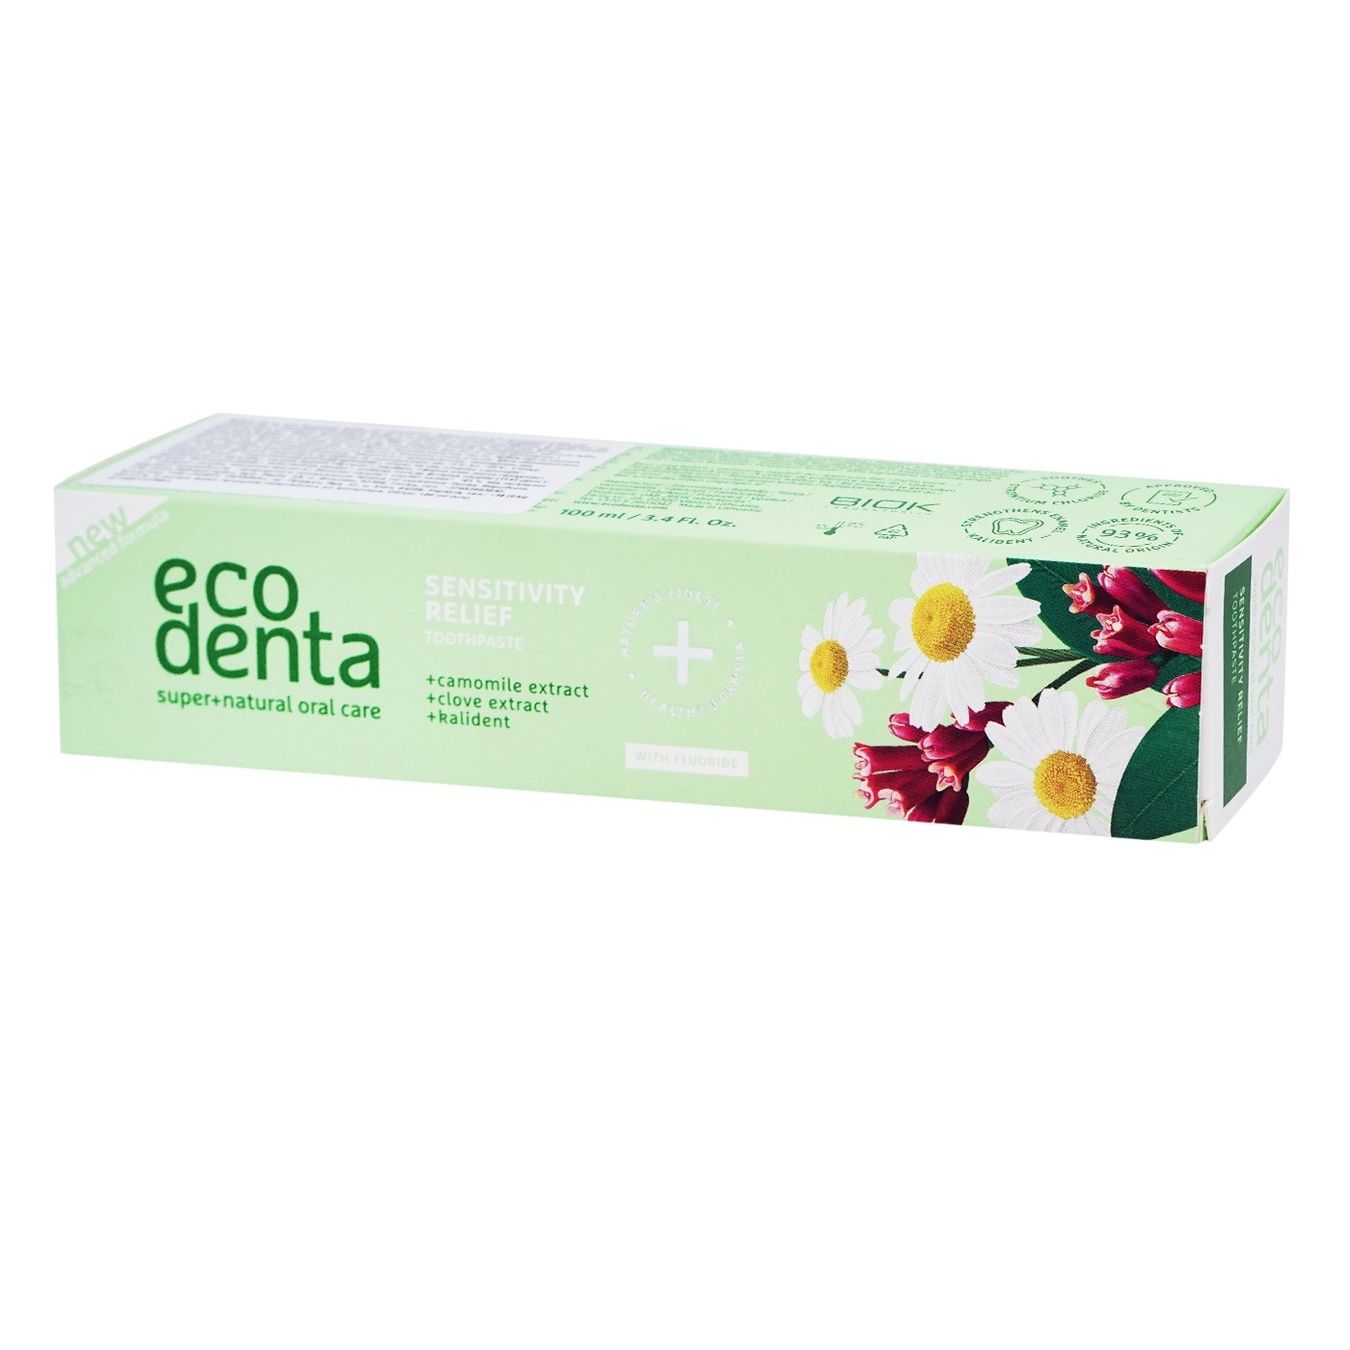 Ecodenta Kalident Toothpaste for sensitive teeth with chamomile and carnation extracts 100ml